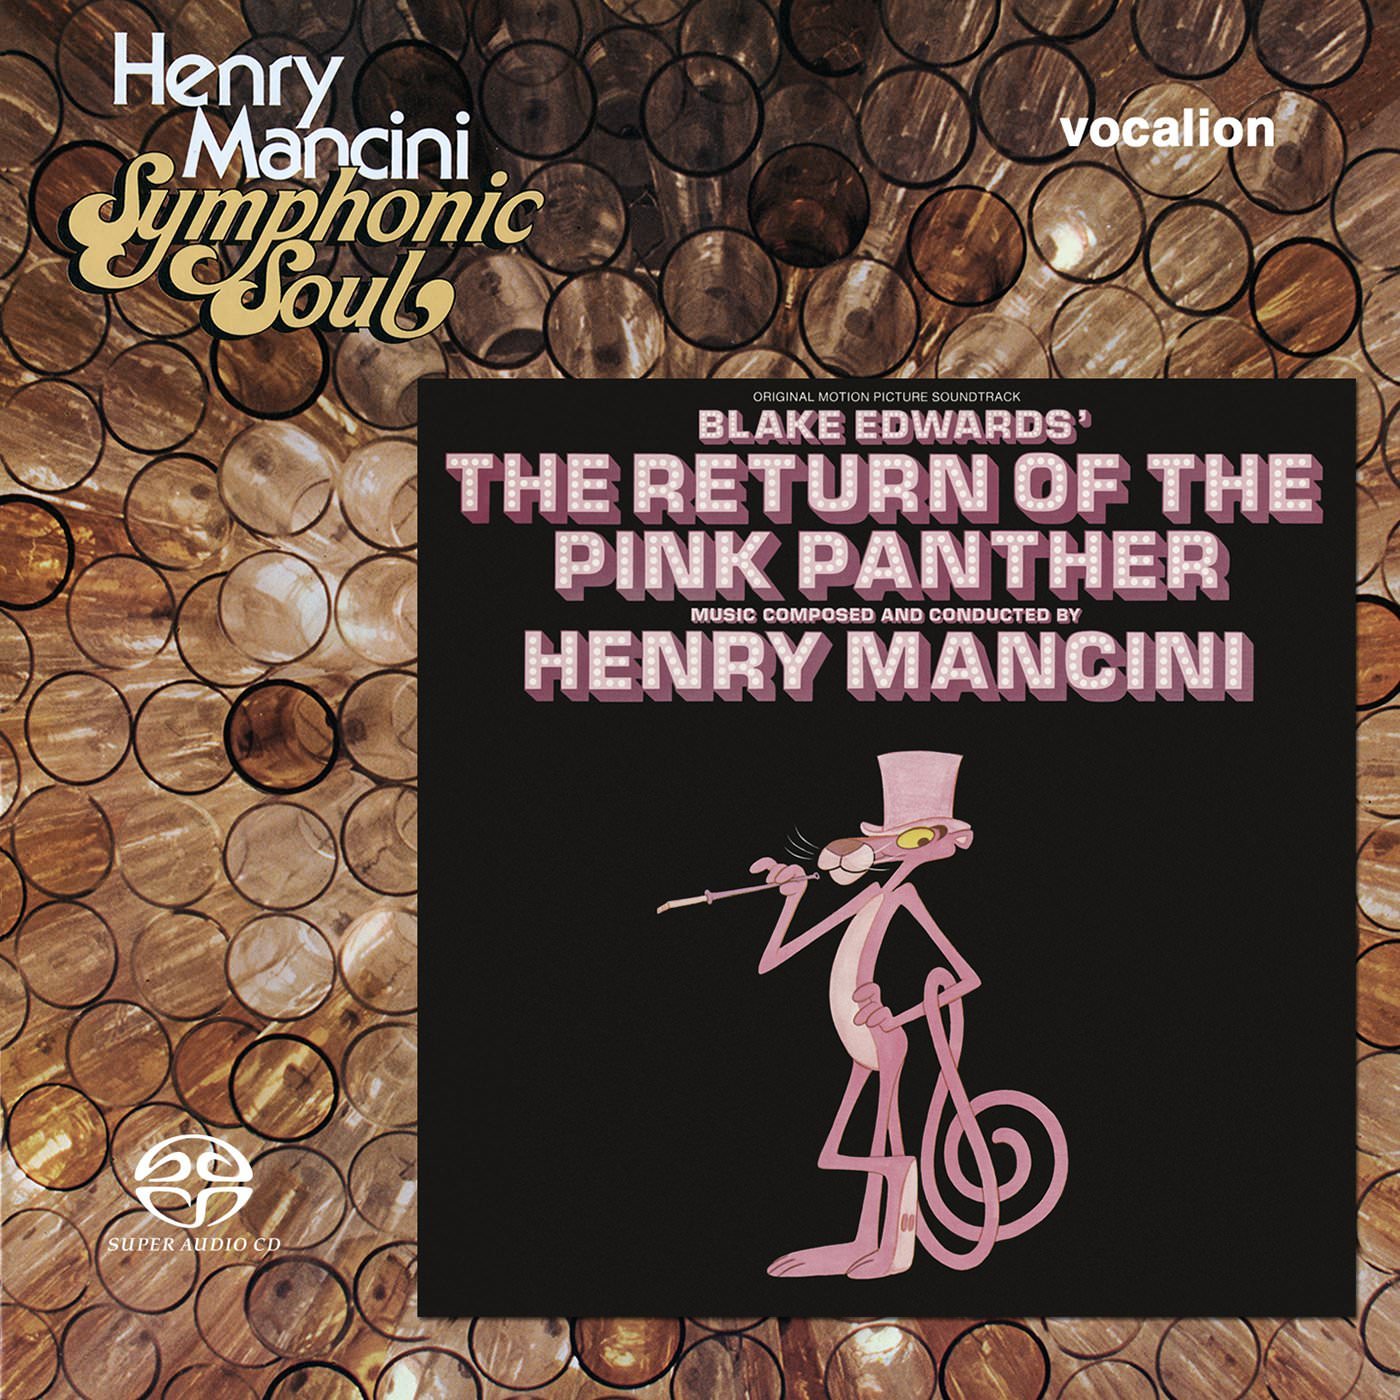 Henry Mancini - Return Of The Pink Panther & Symphonic Soul (1975) [Reissue 2018]  {SACD ISO + FLAC 24bit/88,2kHz}